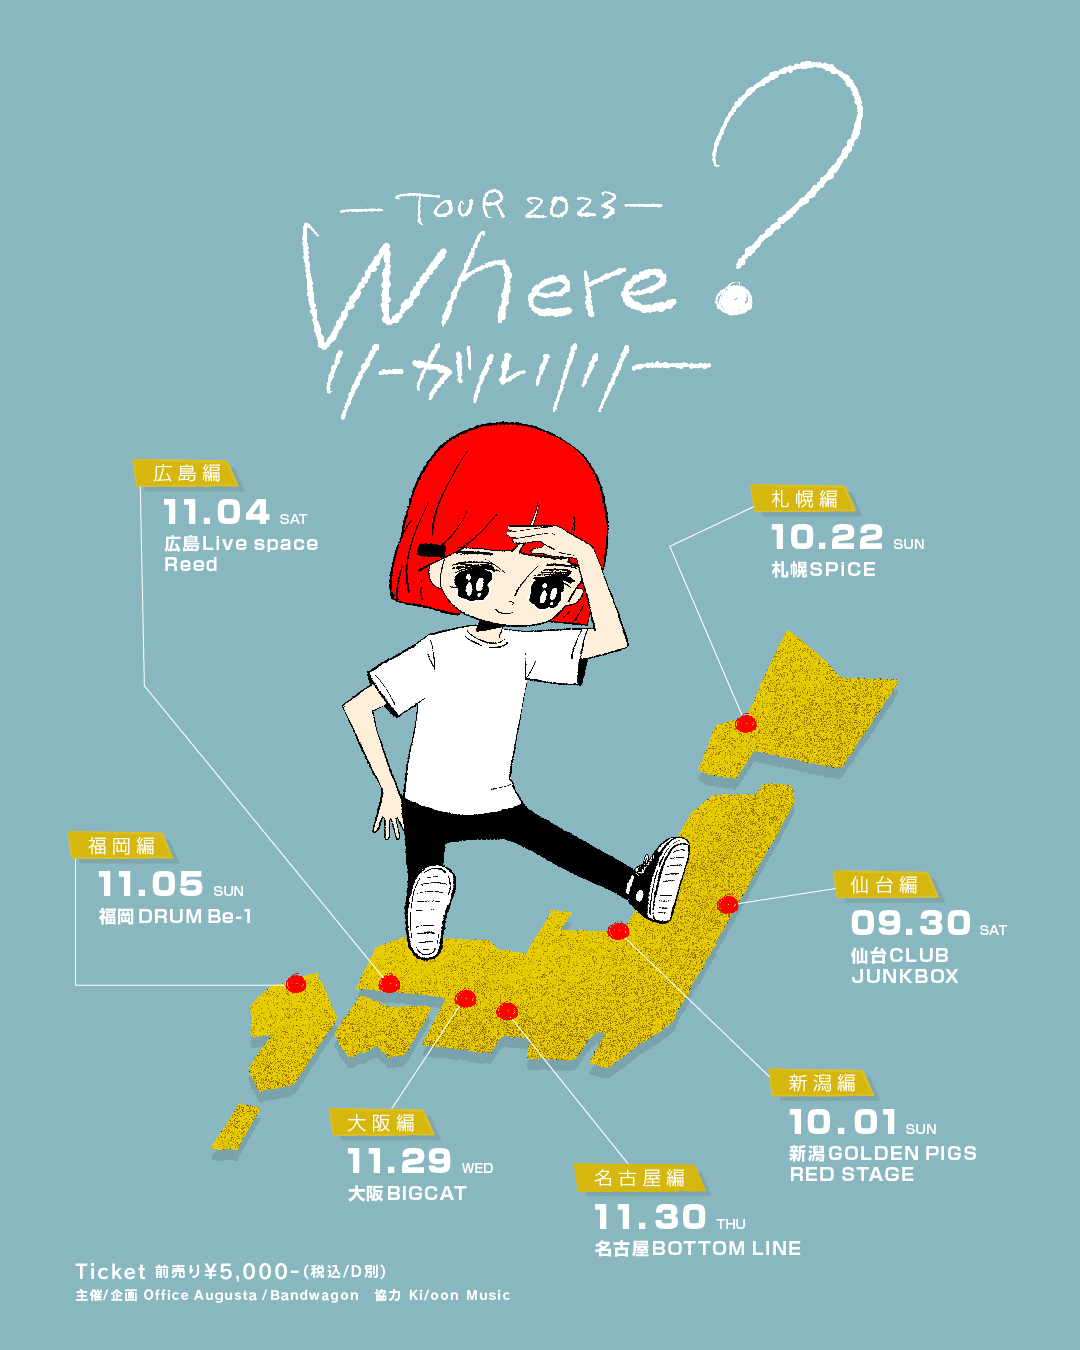 Regal Lily TOUR 2023 "where?" Tickets for Sendai, Niigata and Sapporo performances are now on sale!